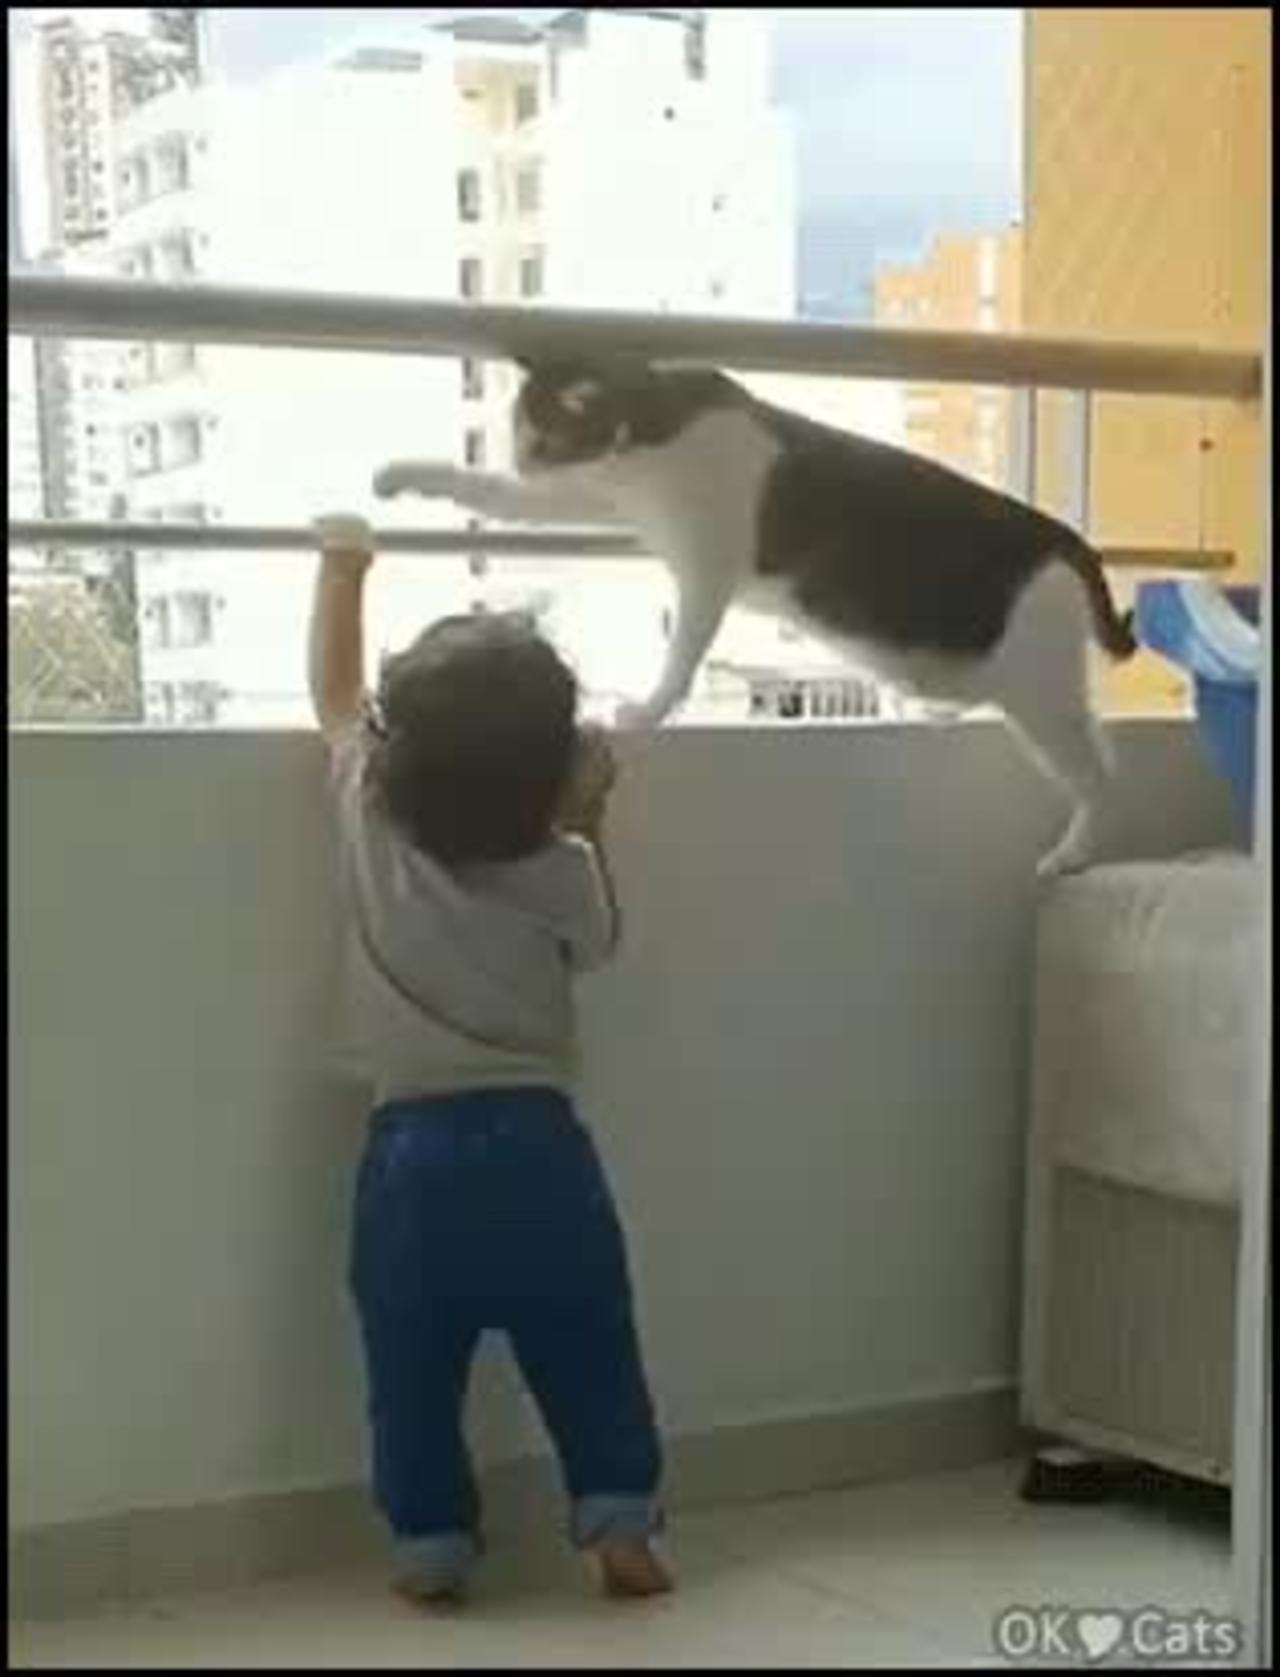 A cat takes care of a human child